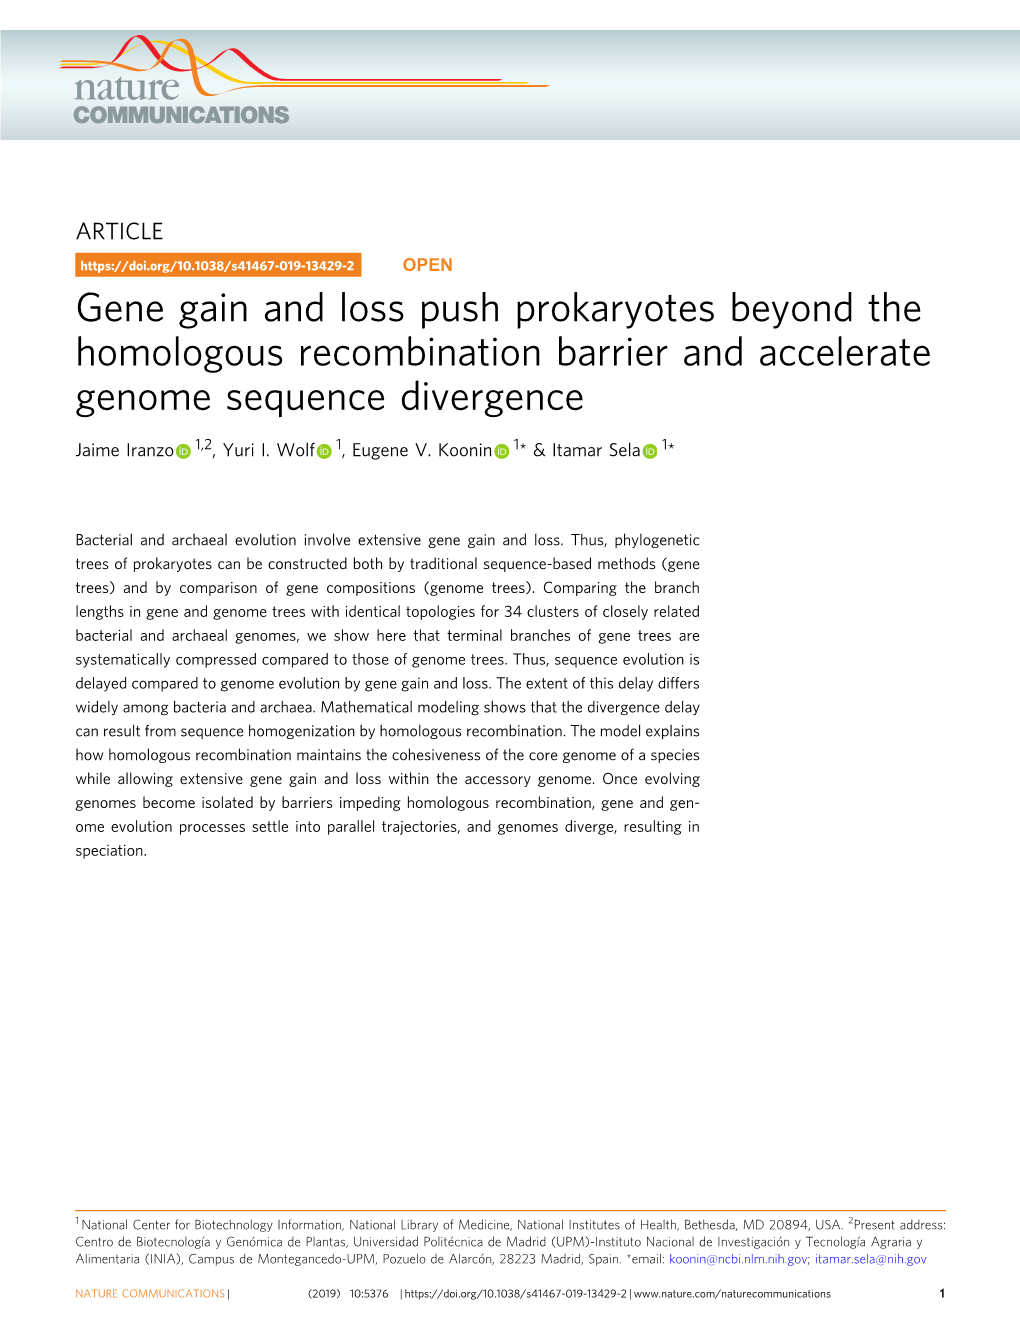 Gene Gain and Loss Push Prokaryotes Beyond the Homologous Recombination Barrier and Accelerate Genome Sequence Divergence